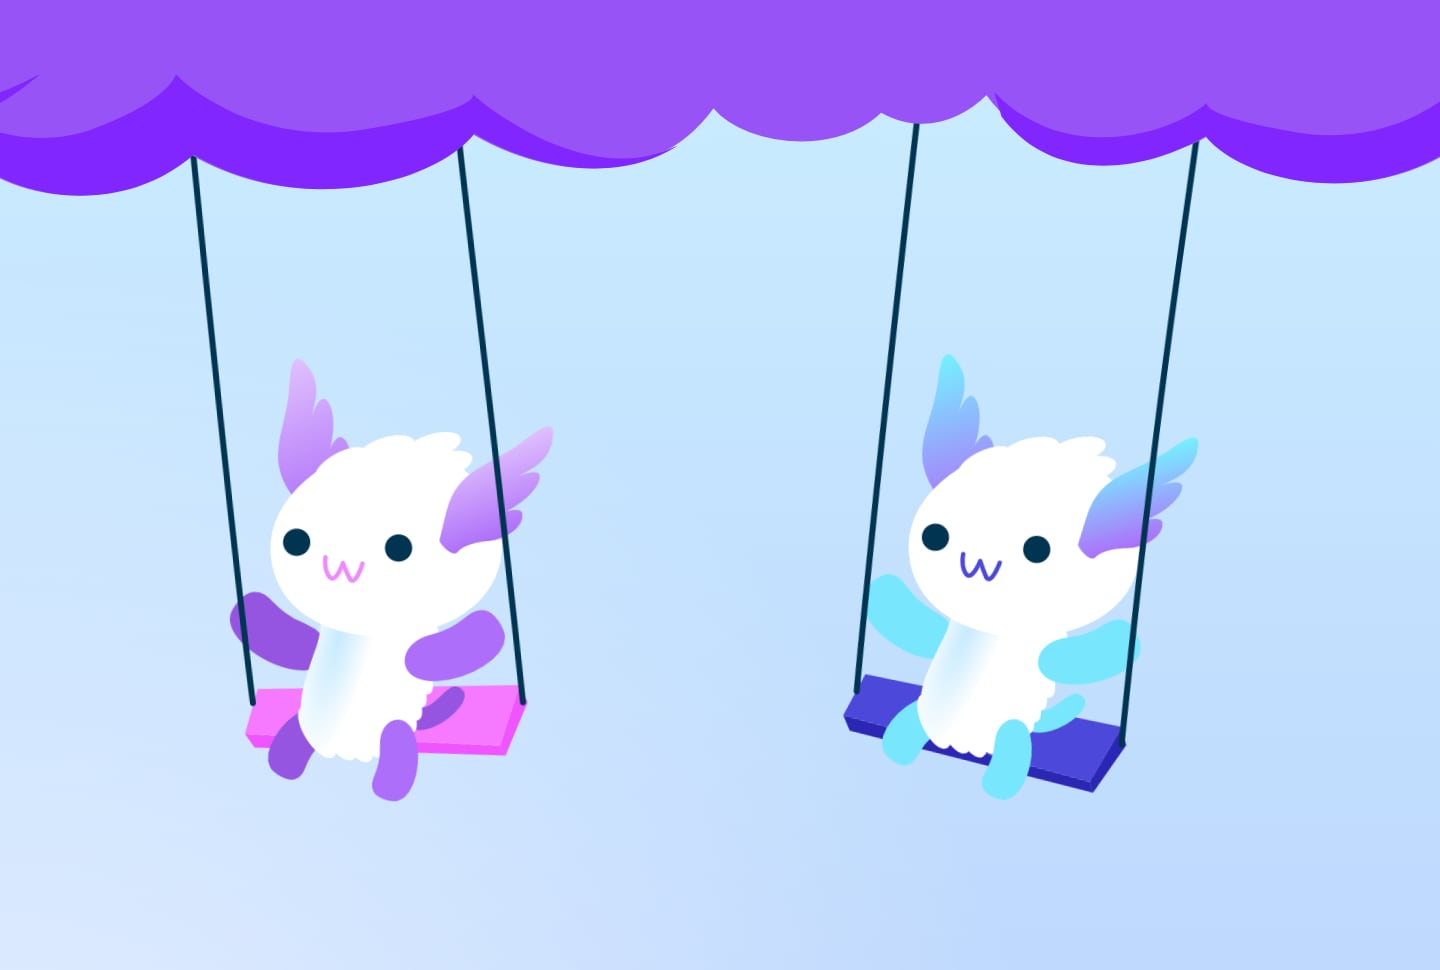 Illustration showing two of our Axol mascots happily swinging from some rope swings descending from some purple clouds.